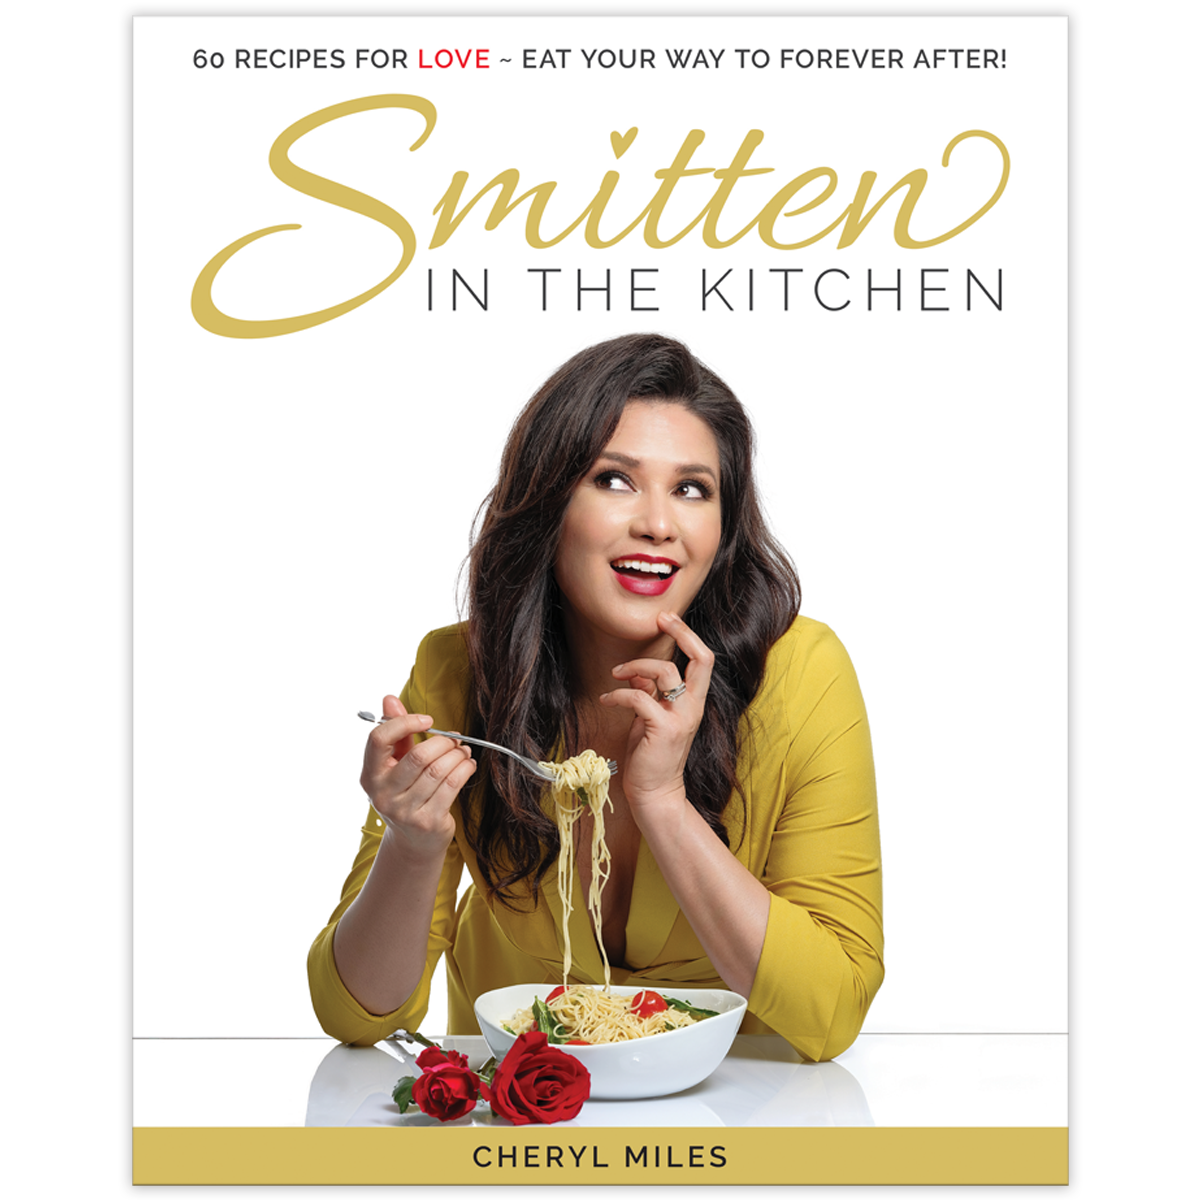 Smitten in the Kitchen (60 Recipes for Love)